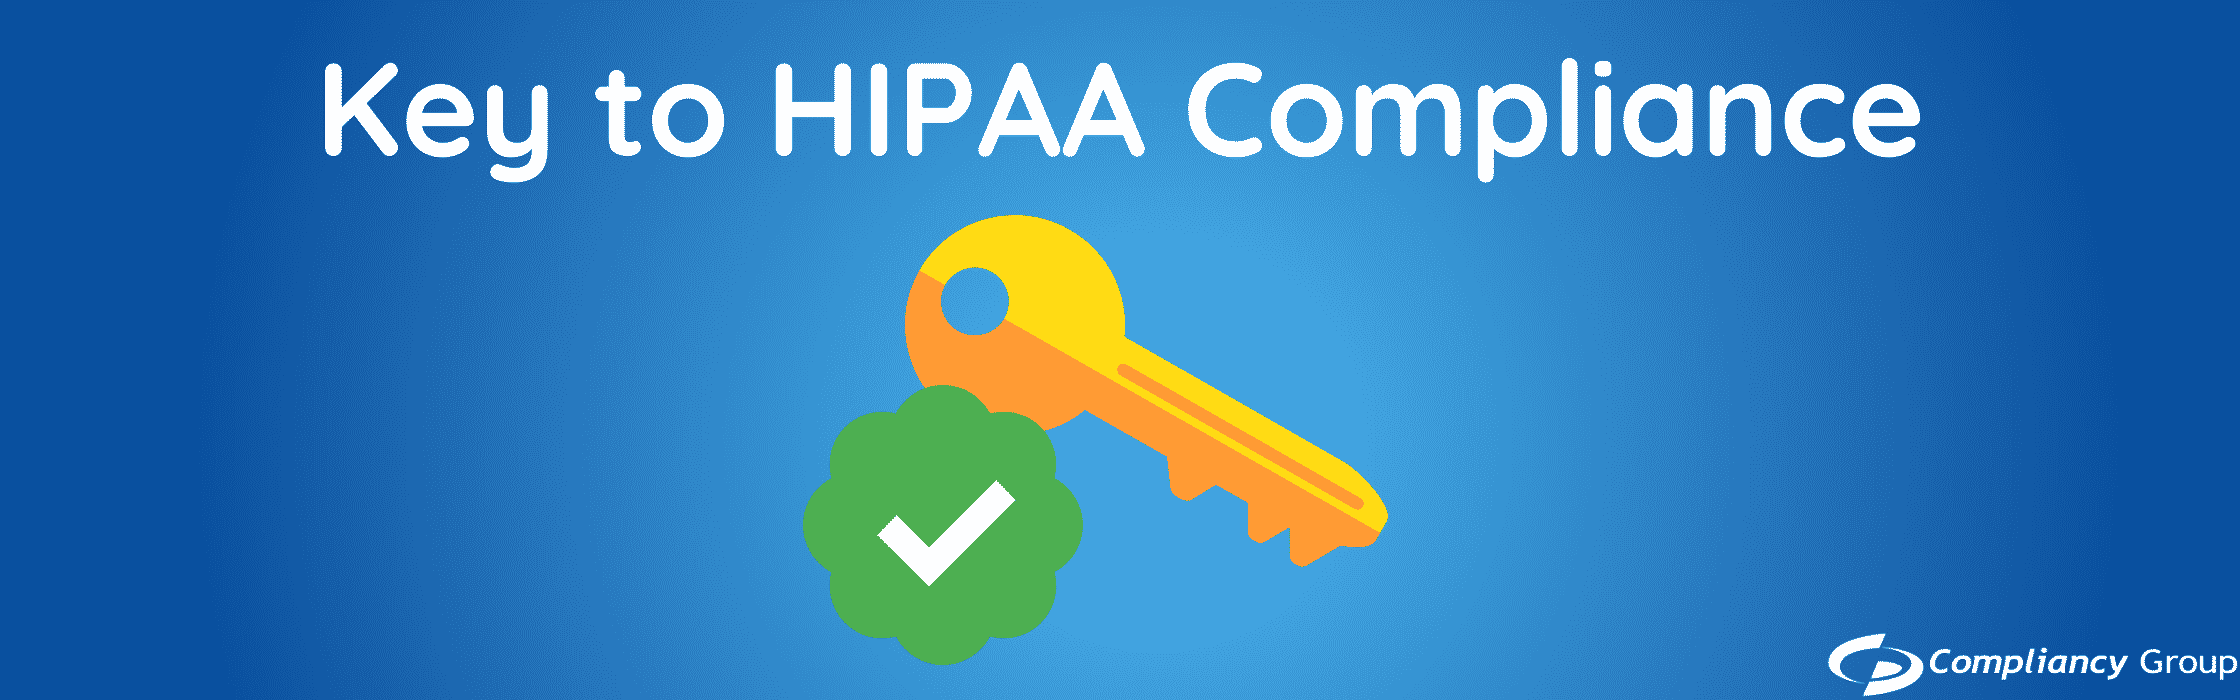 What is the Key to HIPAA Compliance